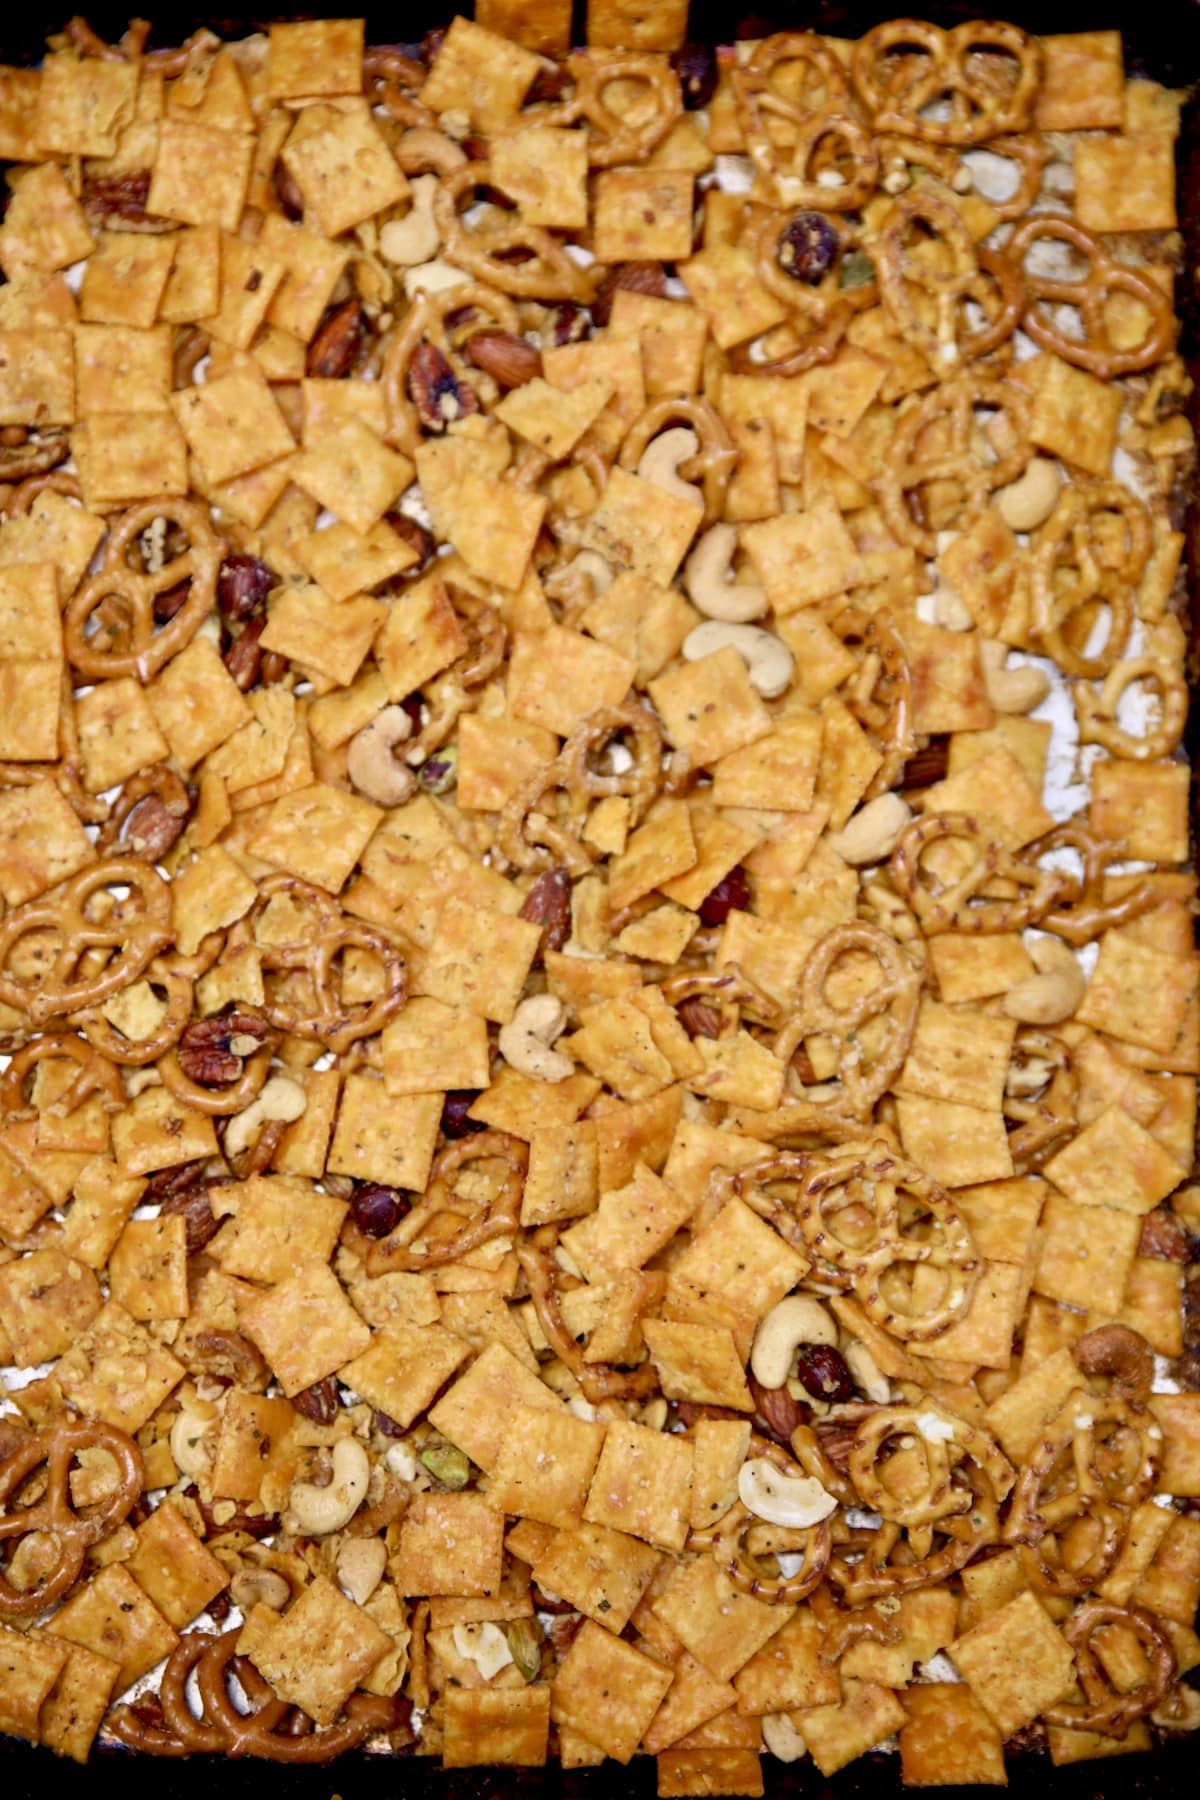 Sheet pan of snack mix with cheese crackers, nuts and pretzels.